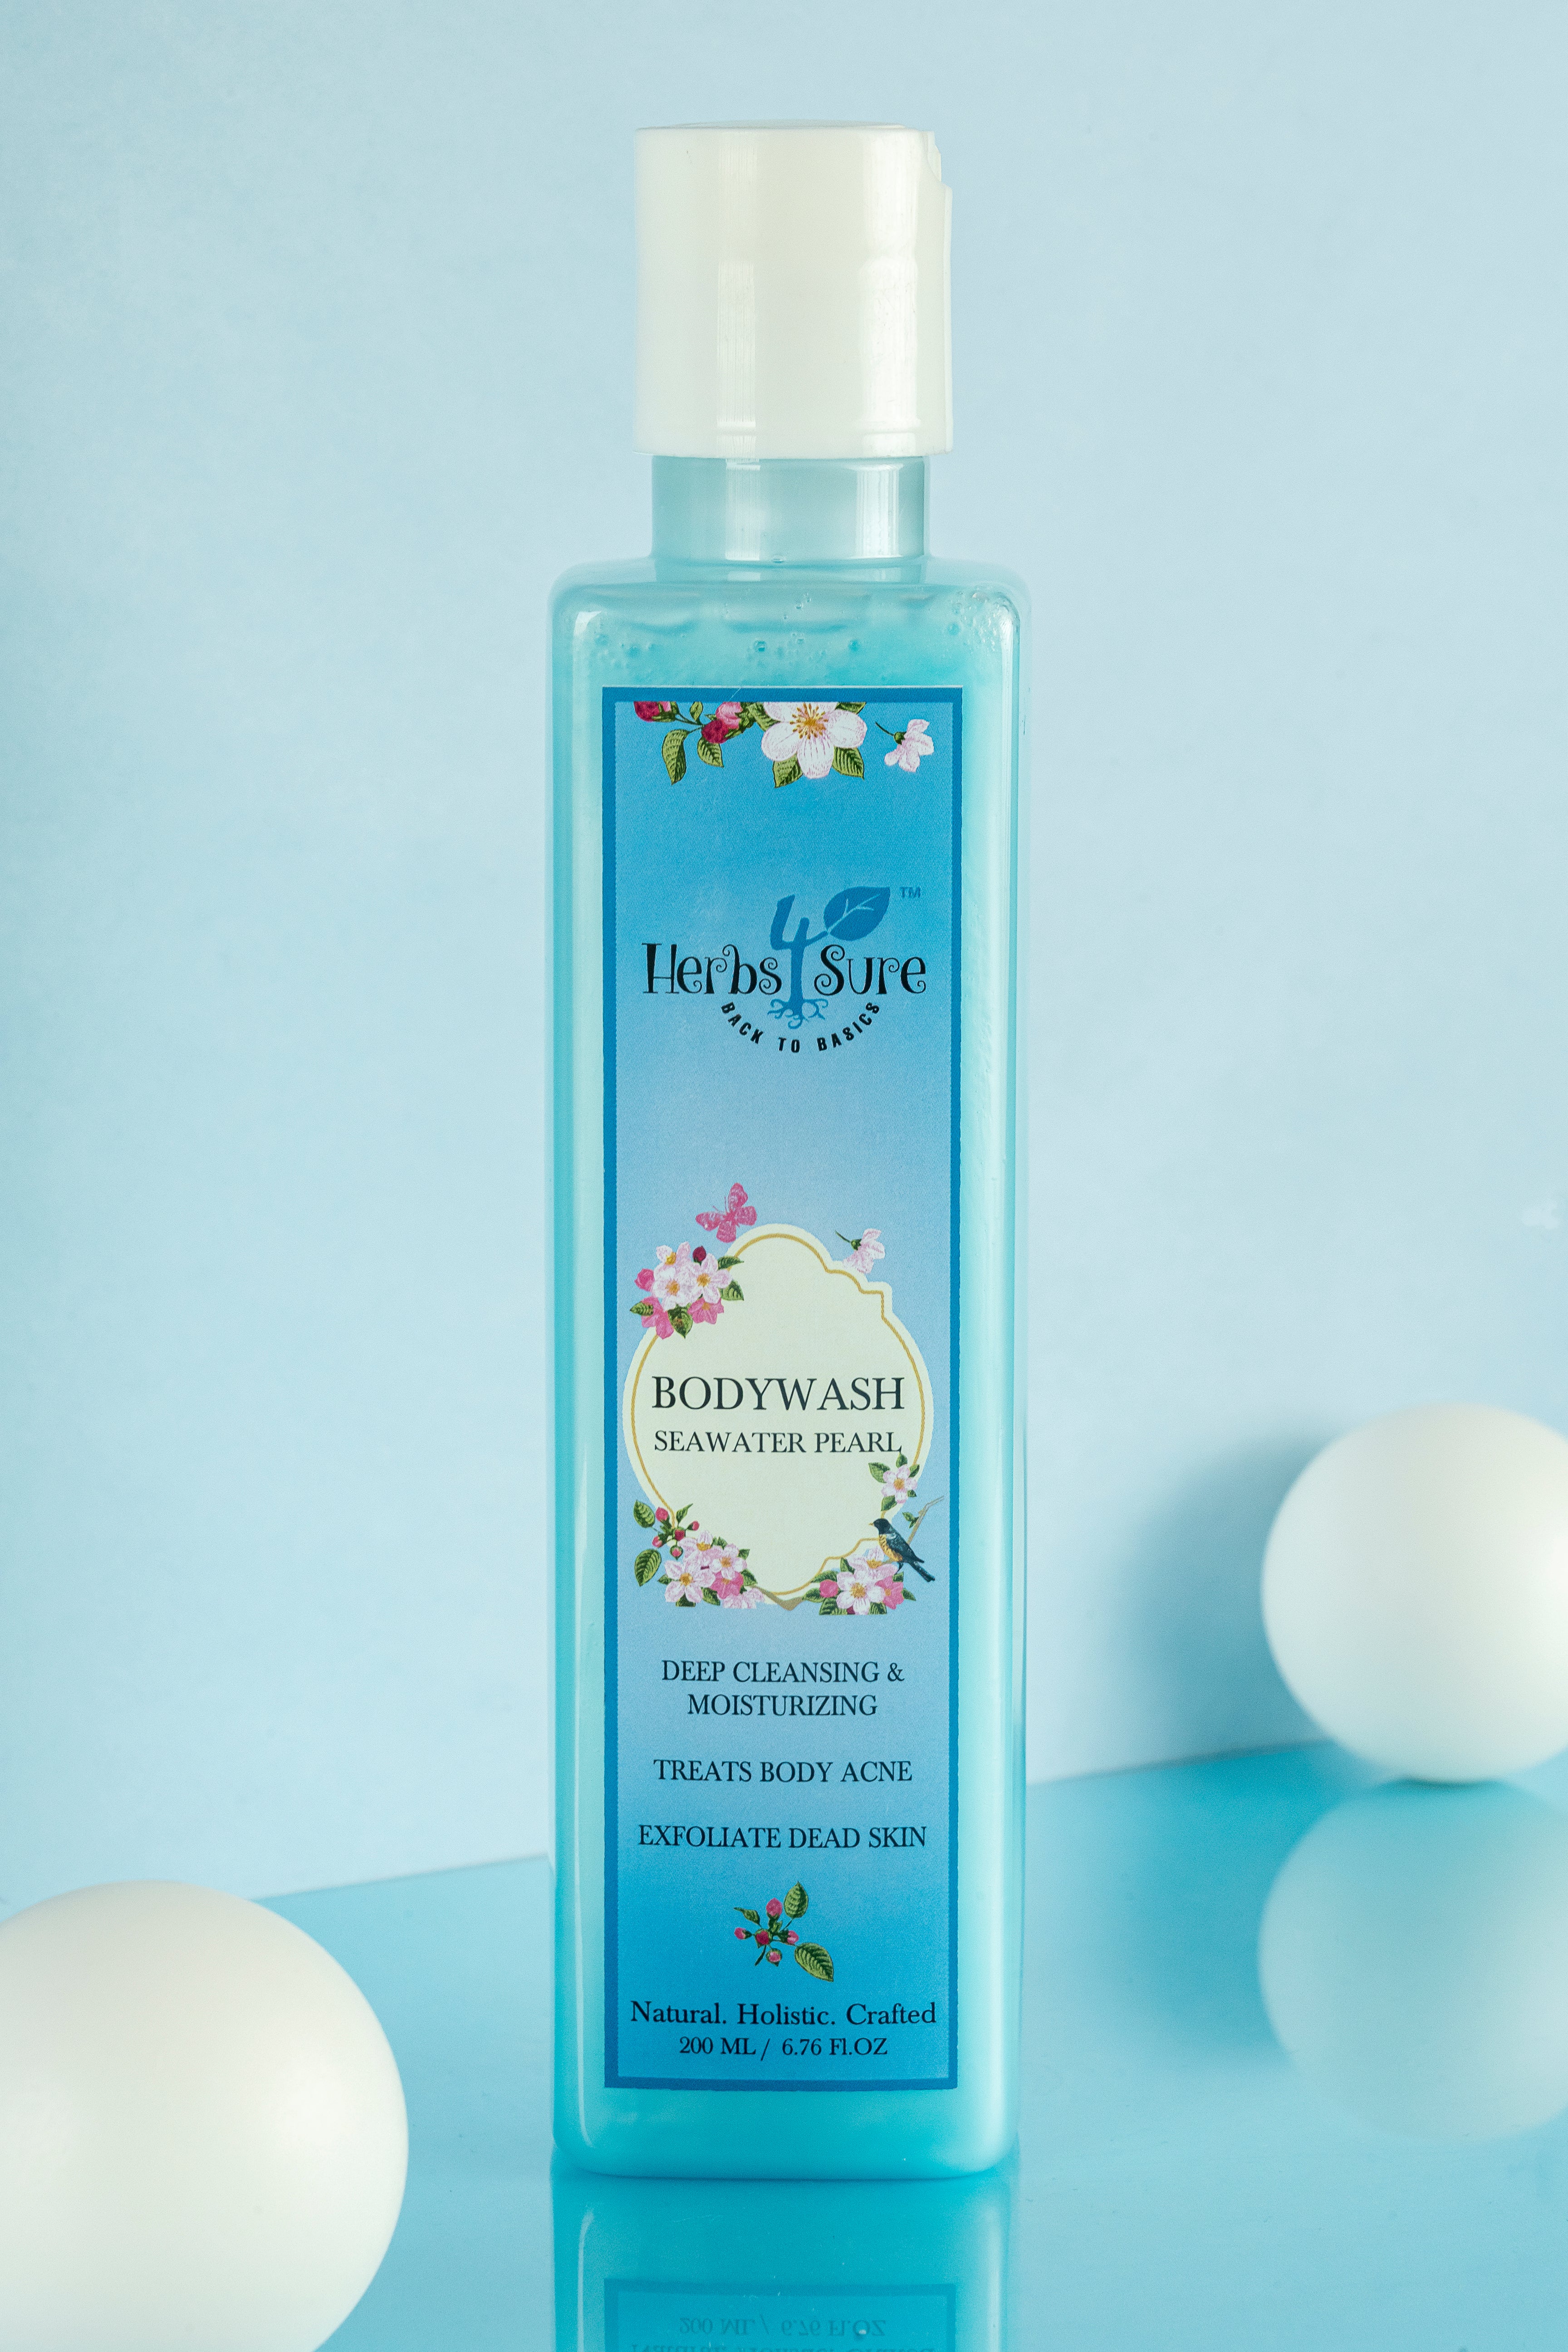 BODYWASH- SEAWATER PEARL- ALL DAY LONG MOISTURIZATION- FOR ALL SKIN TYPES- TREATS BODY ACNE